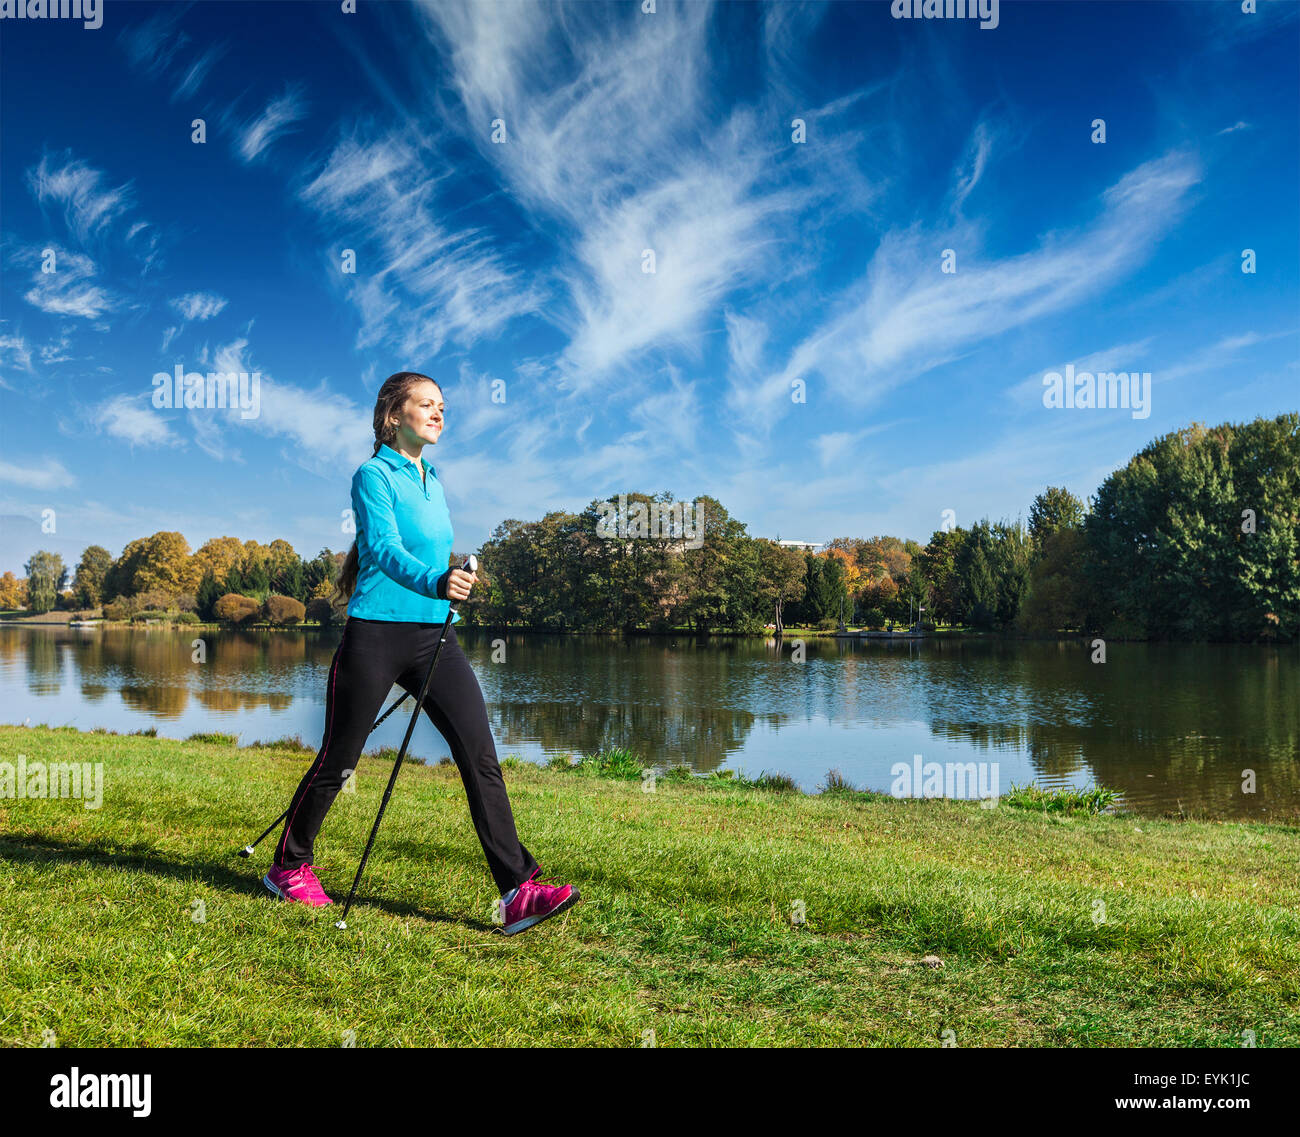 Nordic walking adventure and exercising - young woman hiking with nordic walking poles in park along river Stock Photo